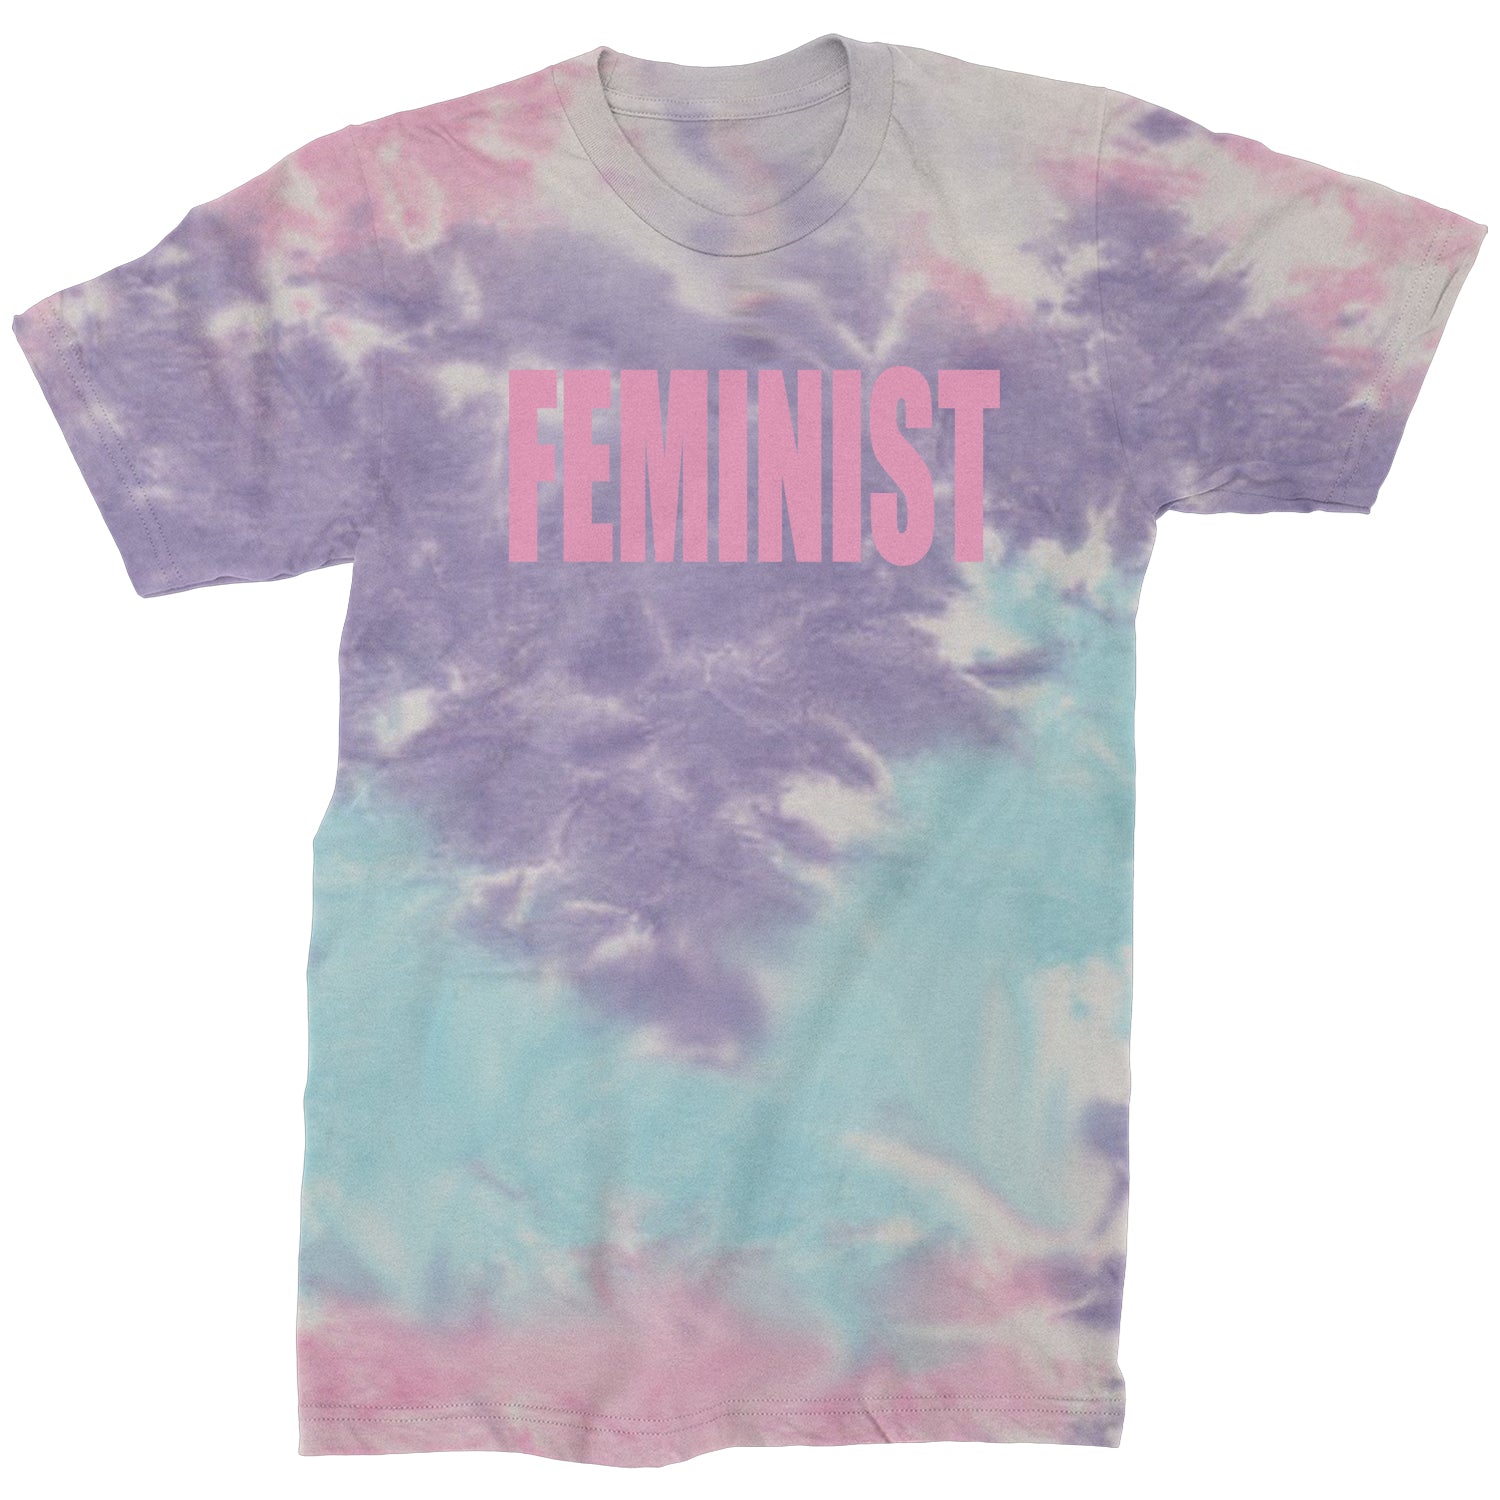 Feminist (Pink Print) Mens T-shirt a, equal, equality, feminism, feminist, gender, is, lgbtq, like, looks, nevertheless, pay, persisted, rights, she, this, what by Expression Tees